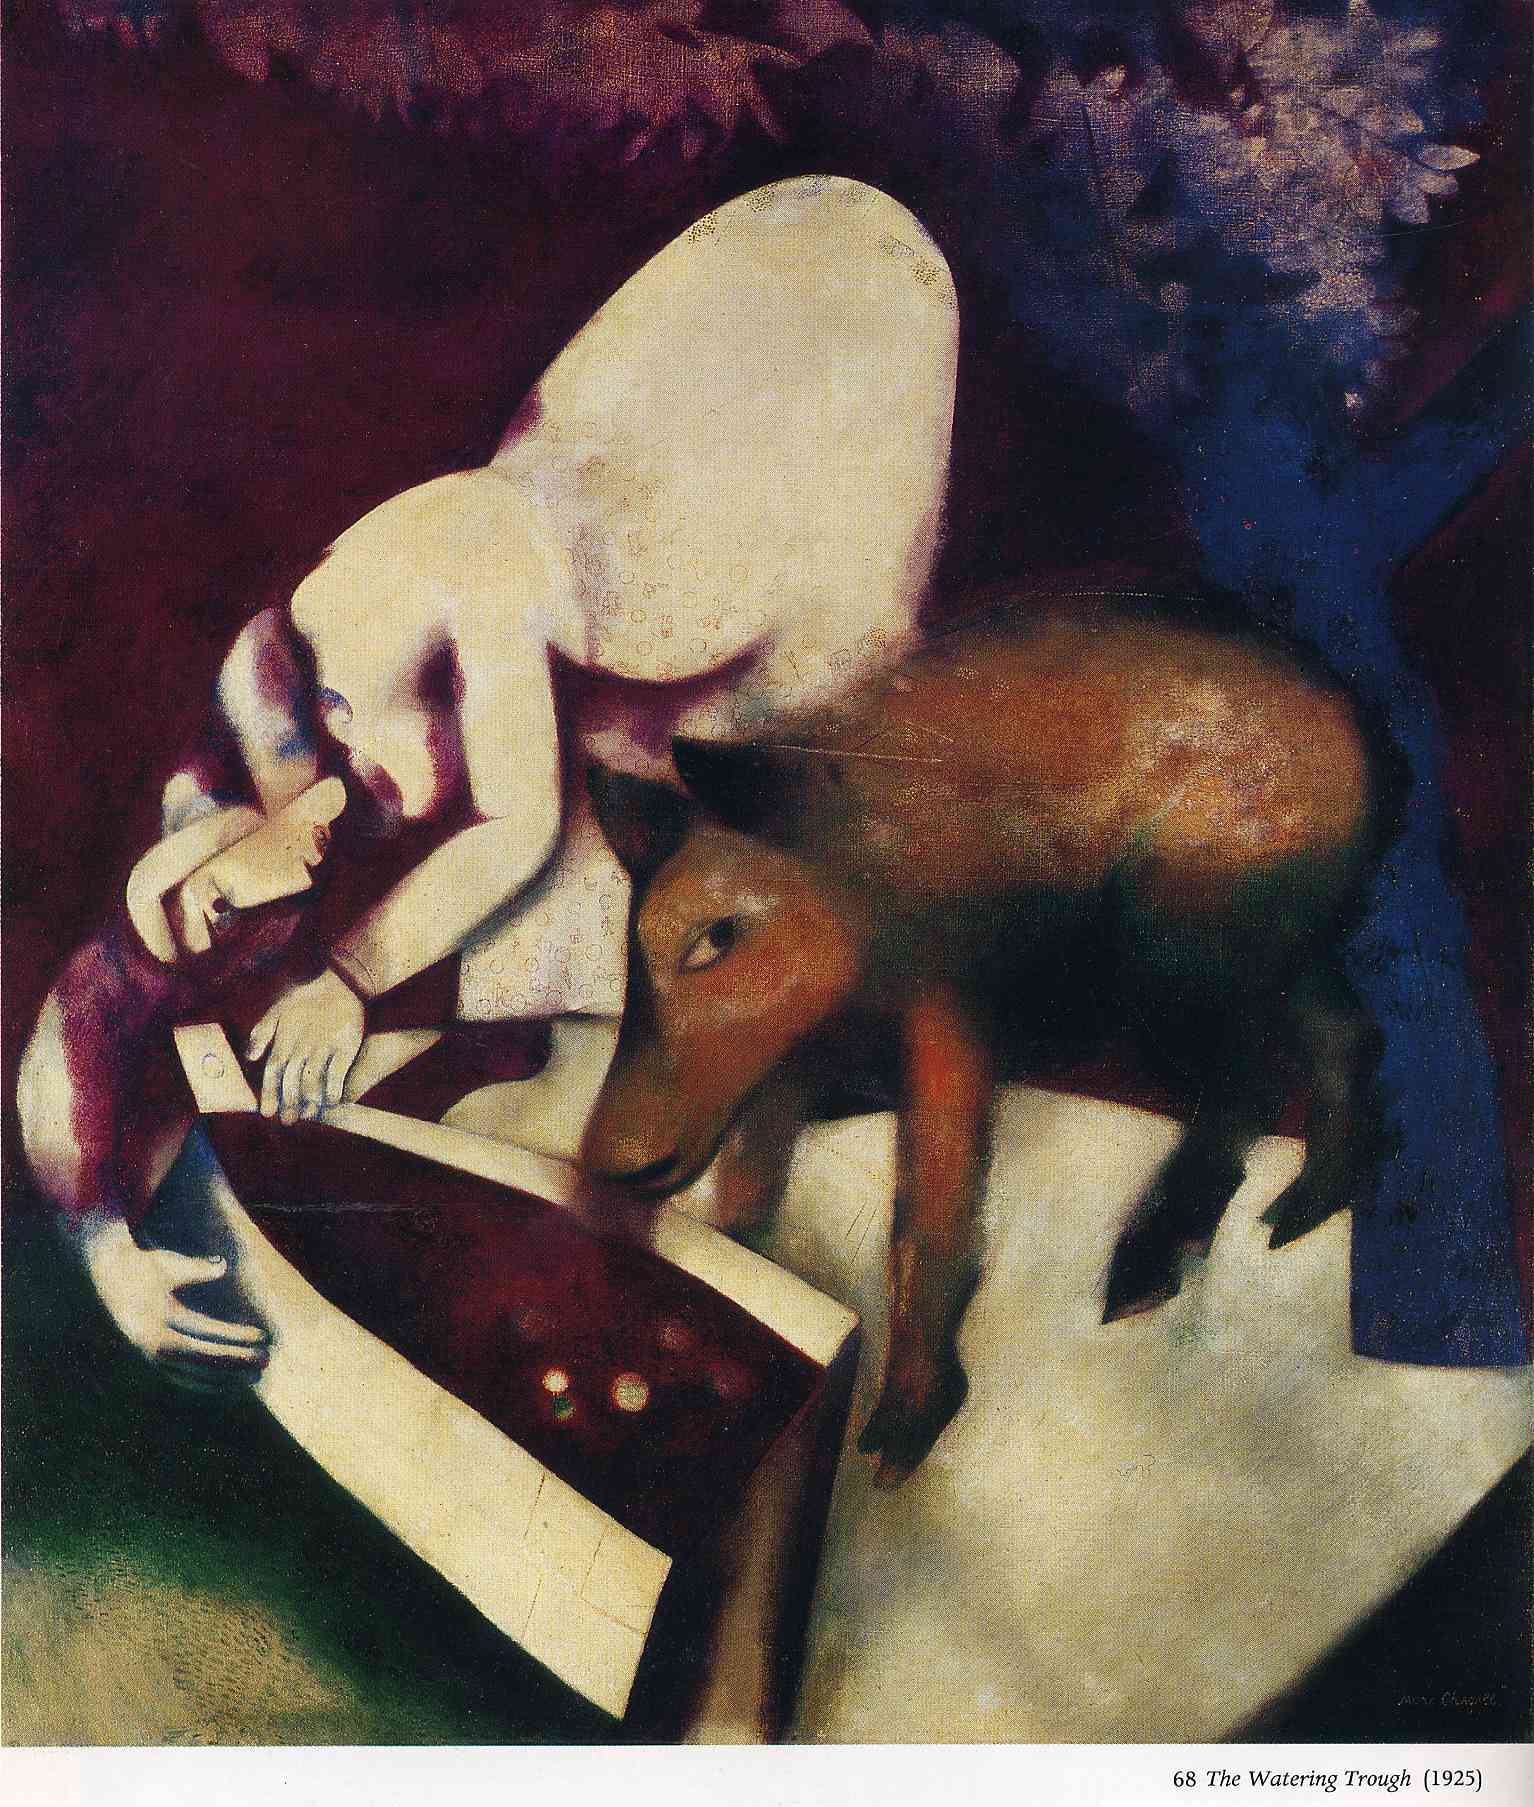 The Watering Trough (1925).